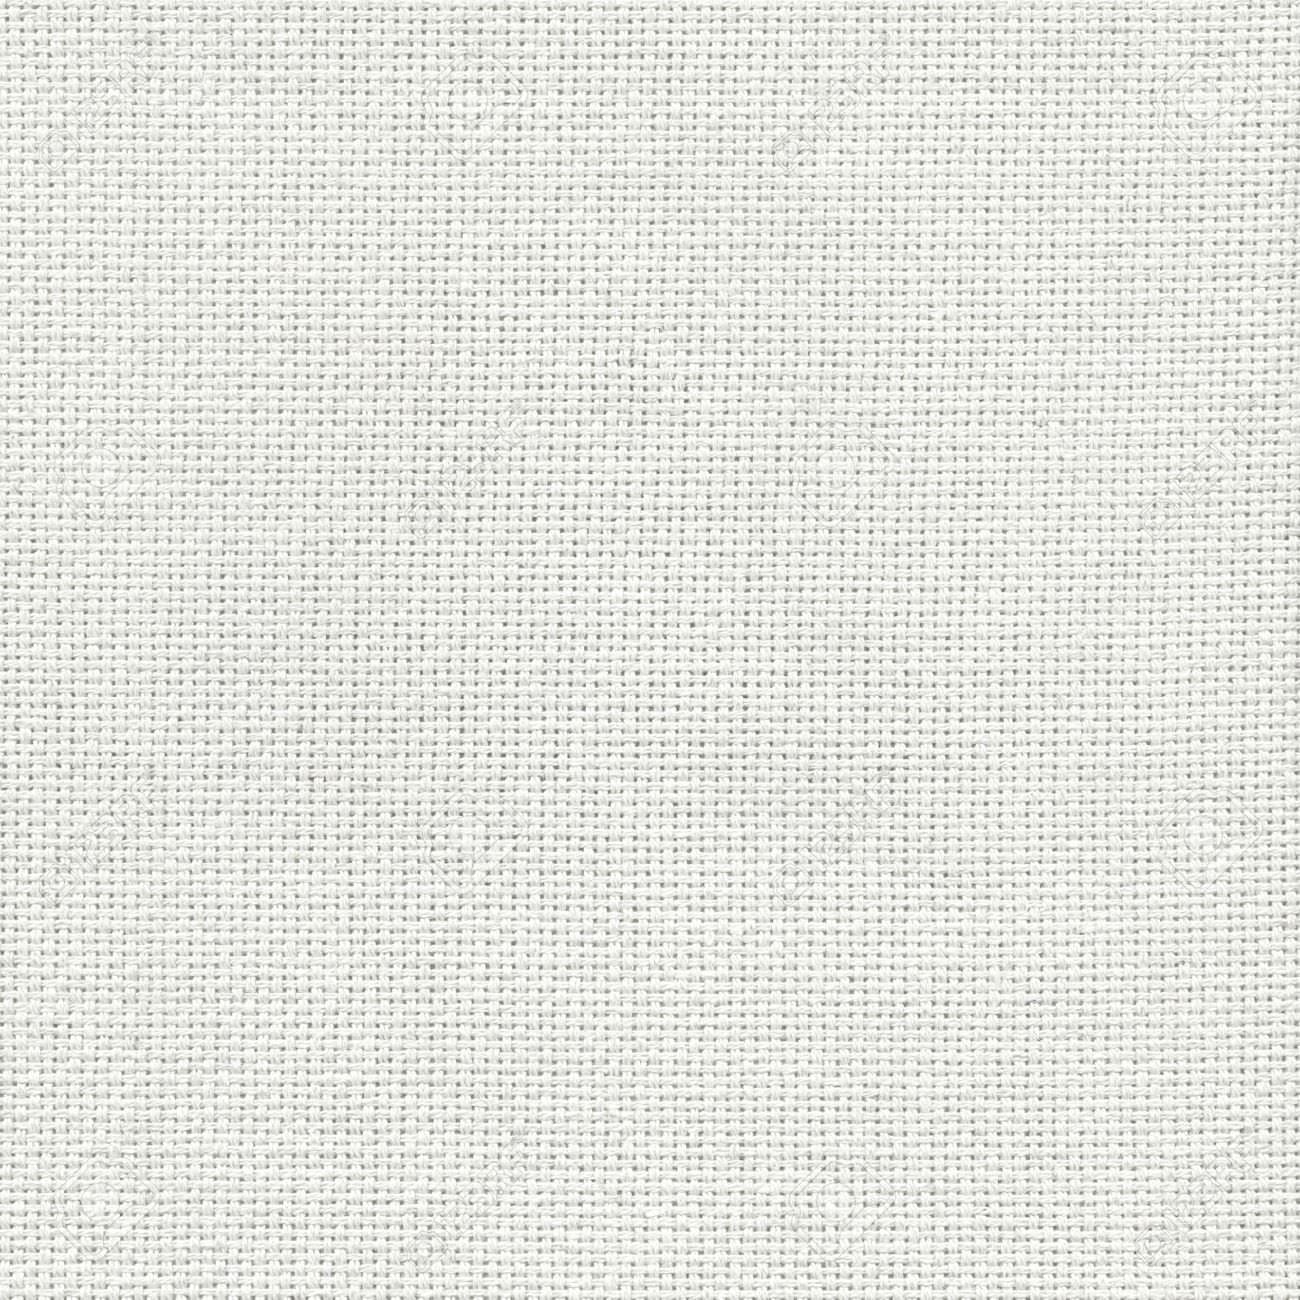 White fabric canvas texture background for design blackdrop or overlay background Photo ...